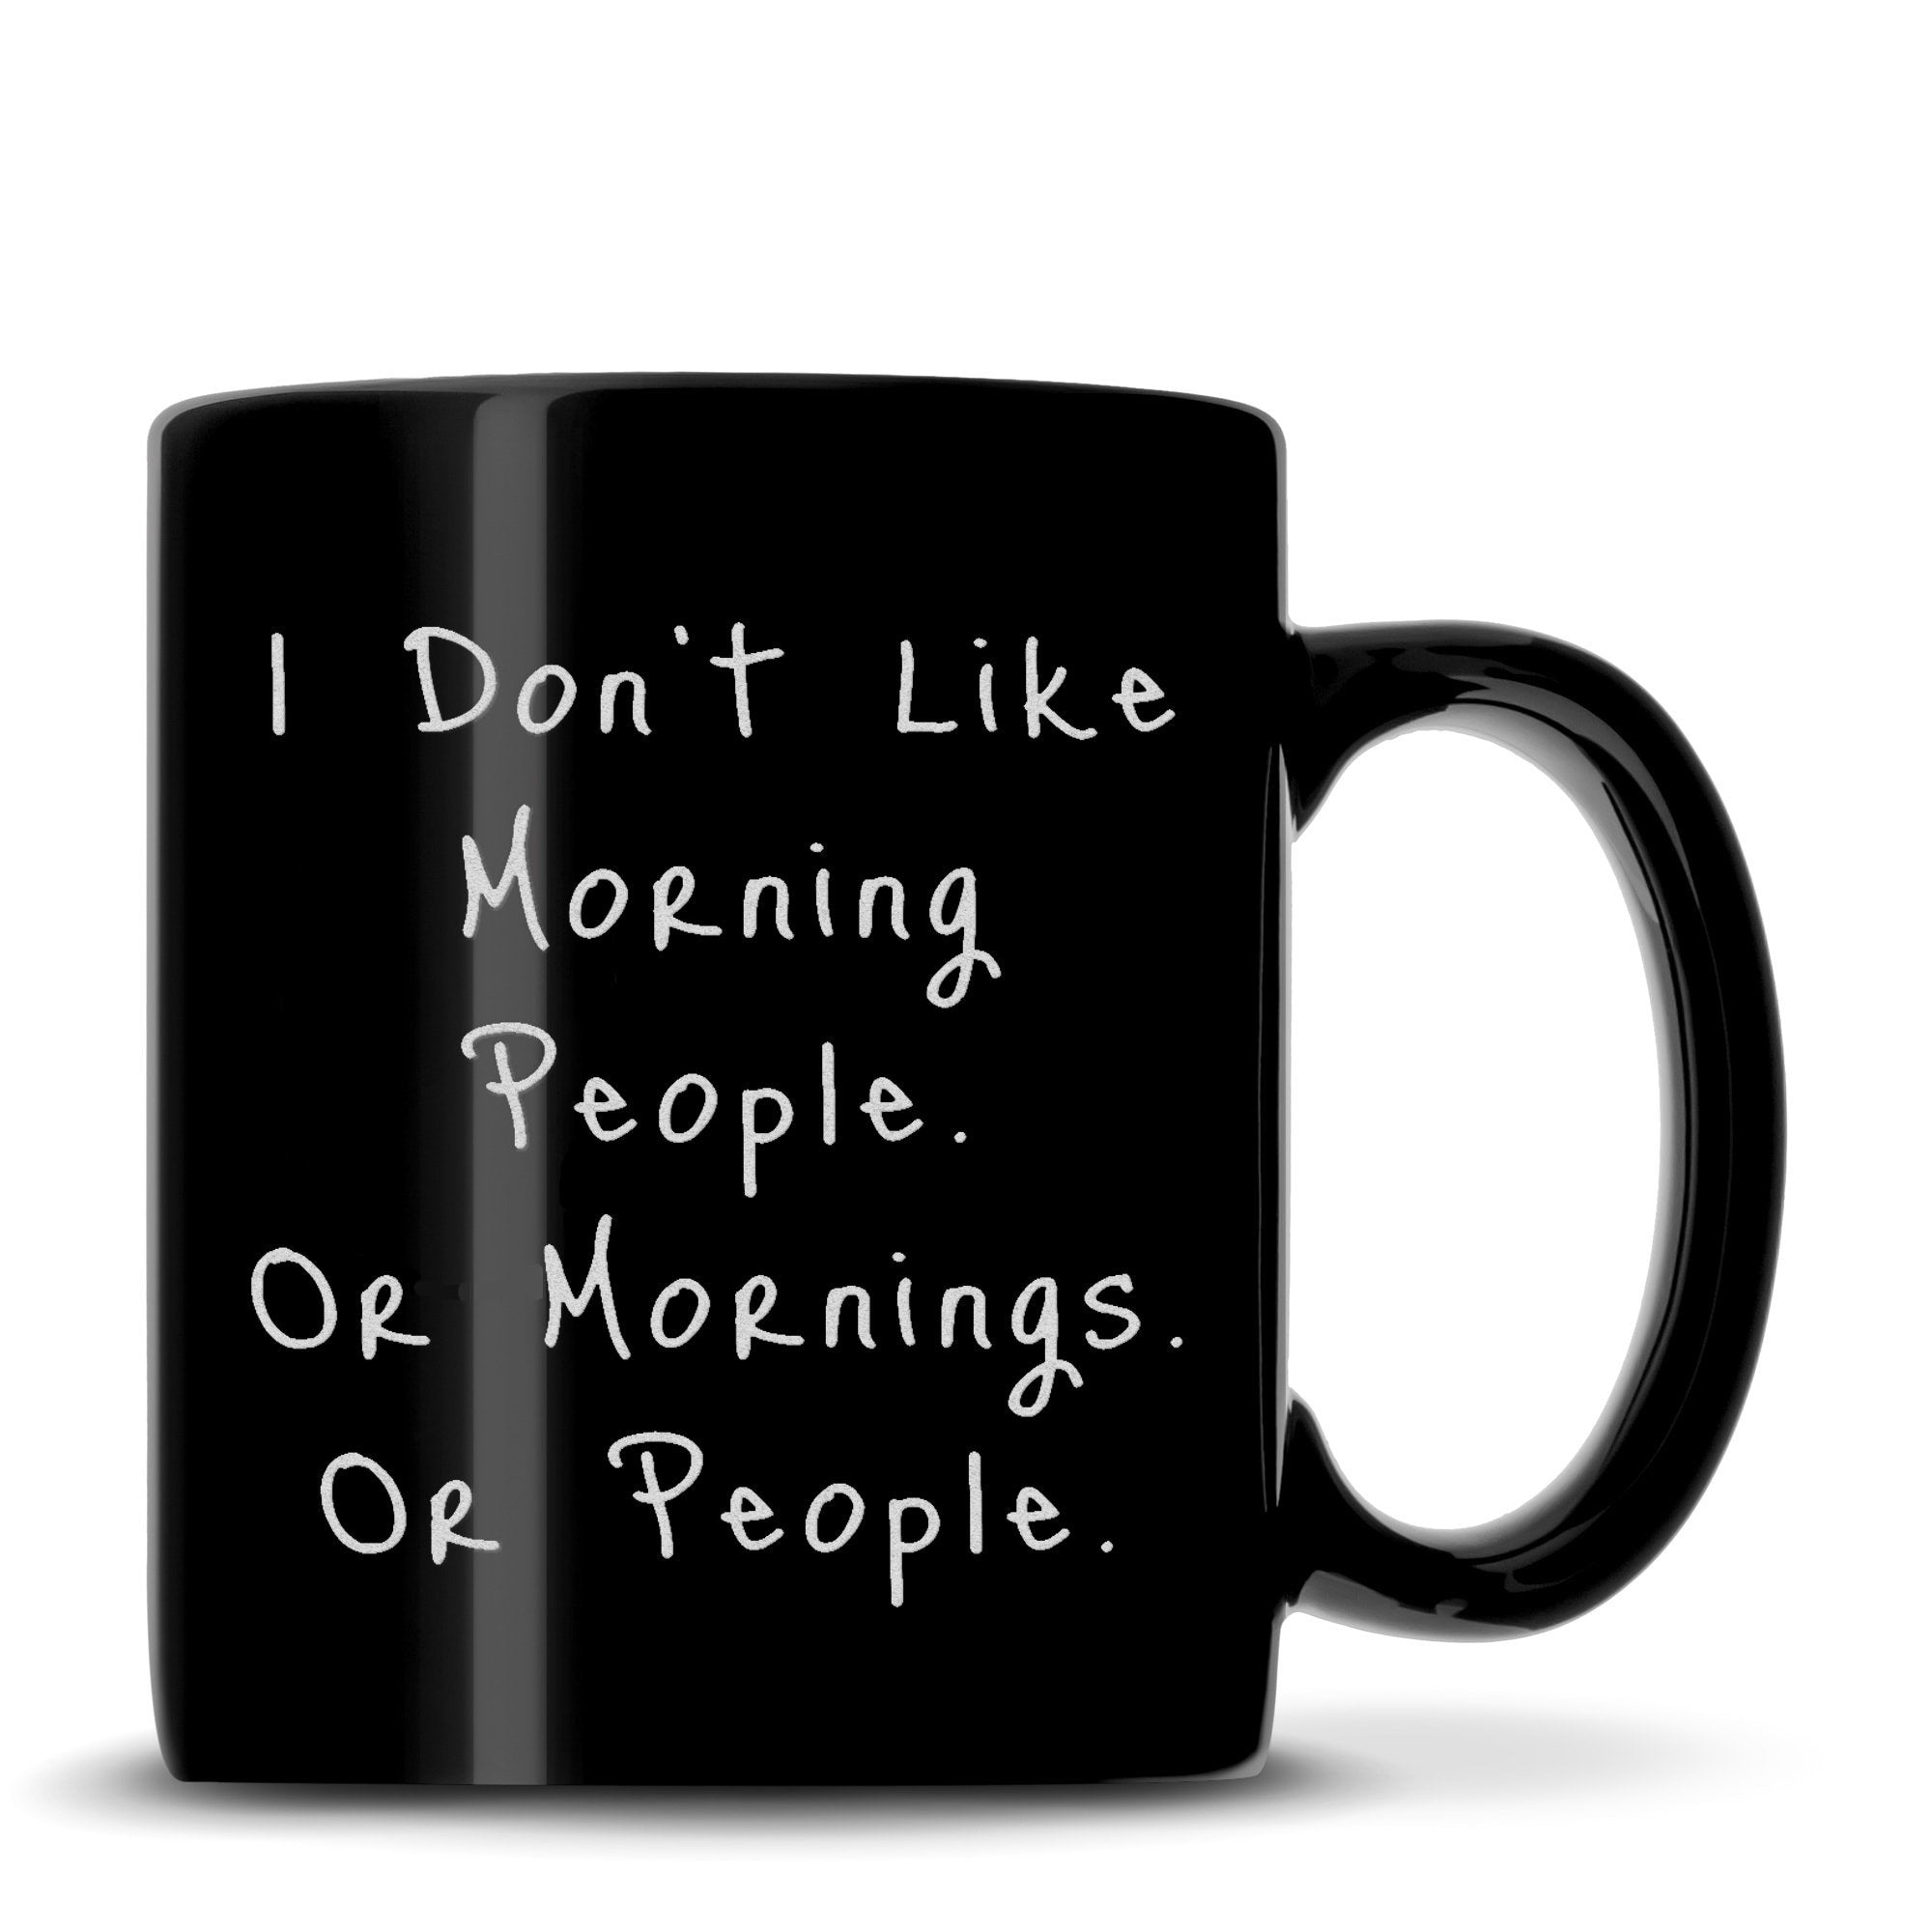 Black Coffee Mug with "I Don't Like Mornings" Design, Deep Etched by Integrity Bottles